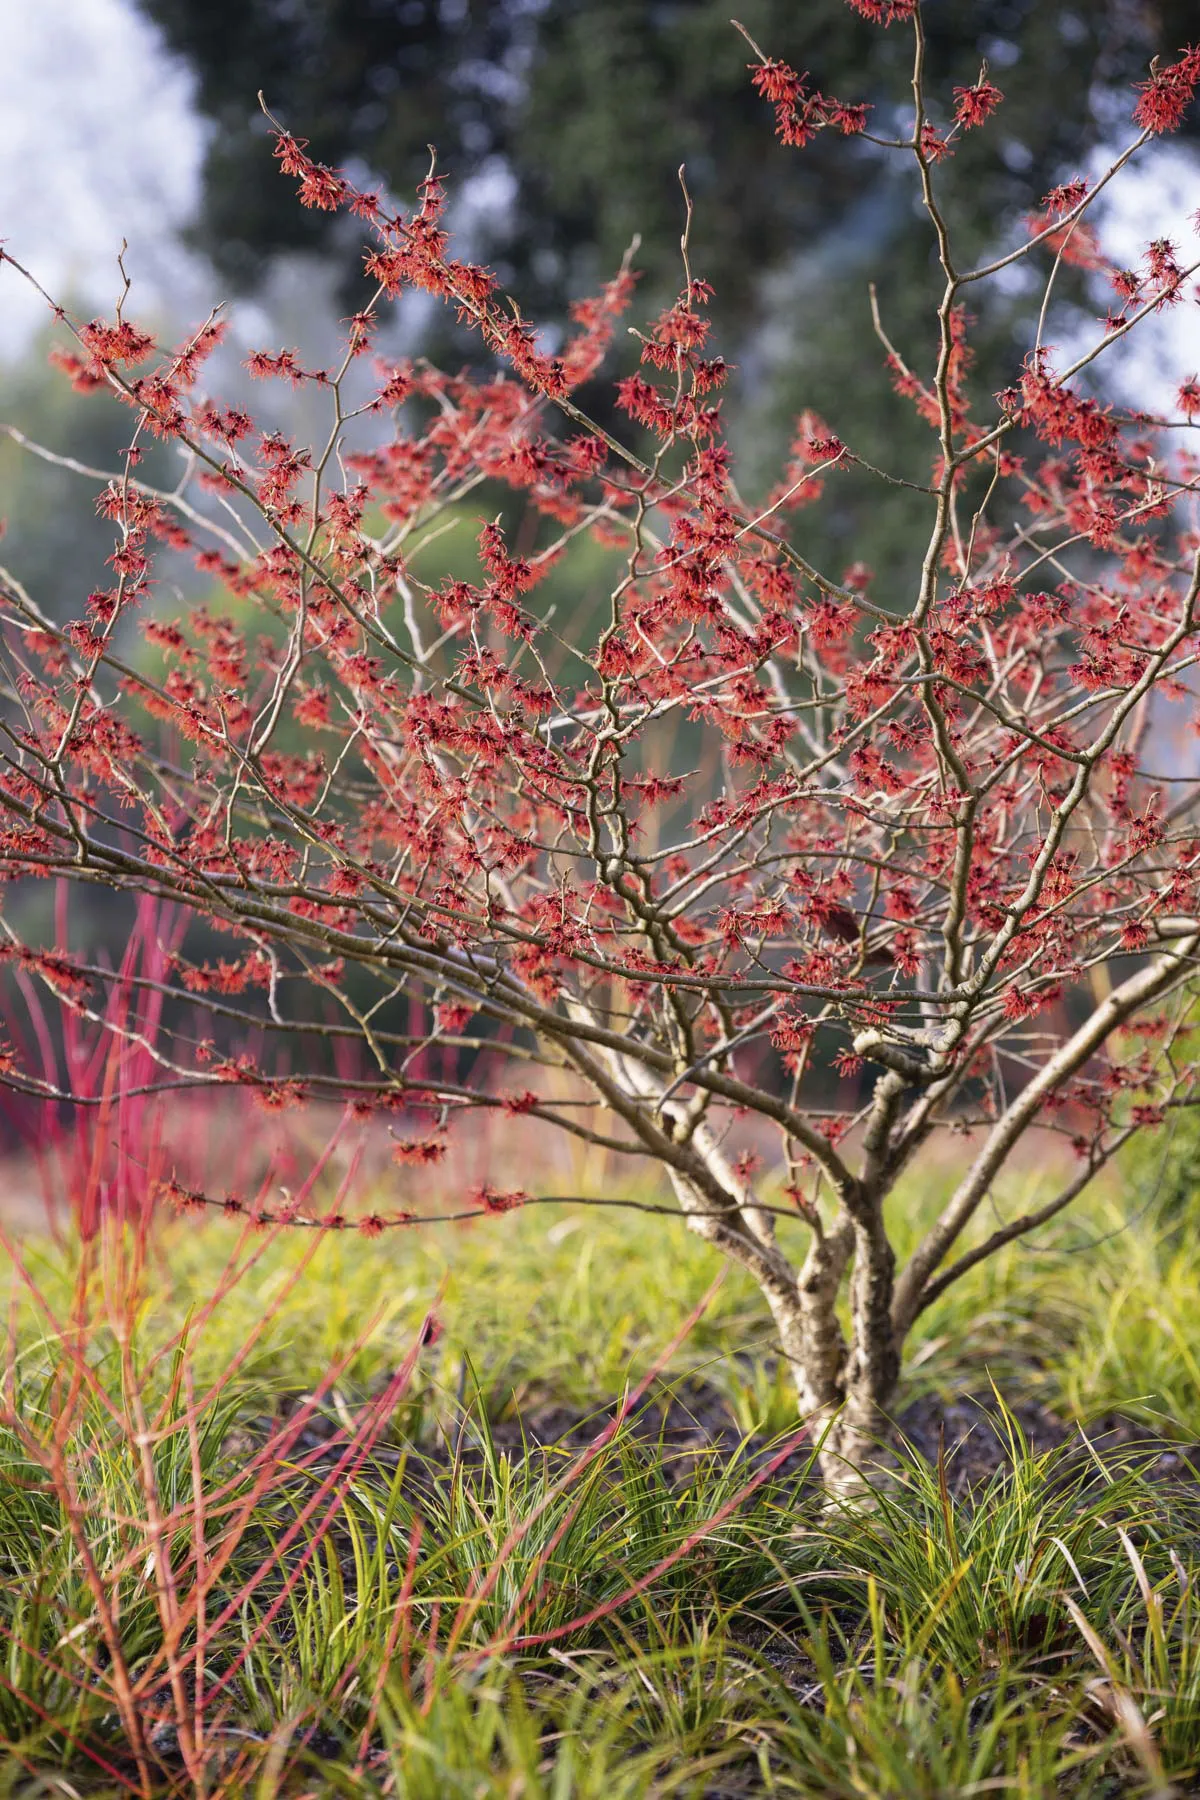 Hamamelis x intermedia ‘Carmine Red’ A large, spreading, deciduous shrub with leaves that turn vibrant autumnal shades before falling, and lightly scented, coral-red flowers in late winter. 3m x 4m. RHS H4, USDA 5a-9b.